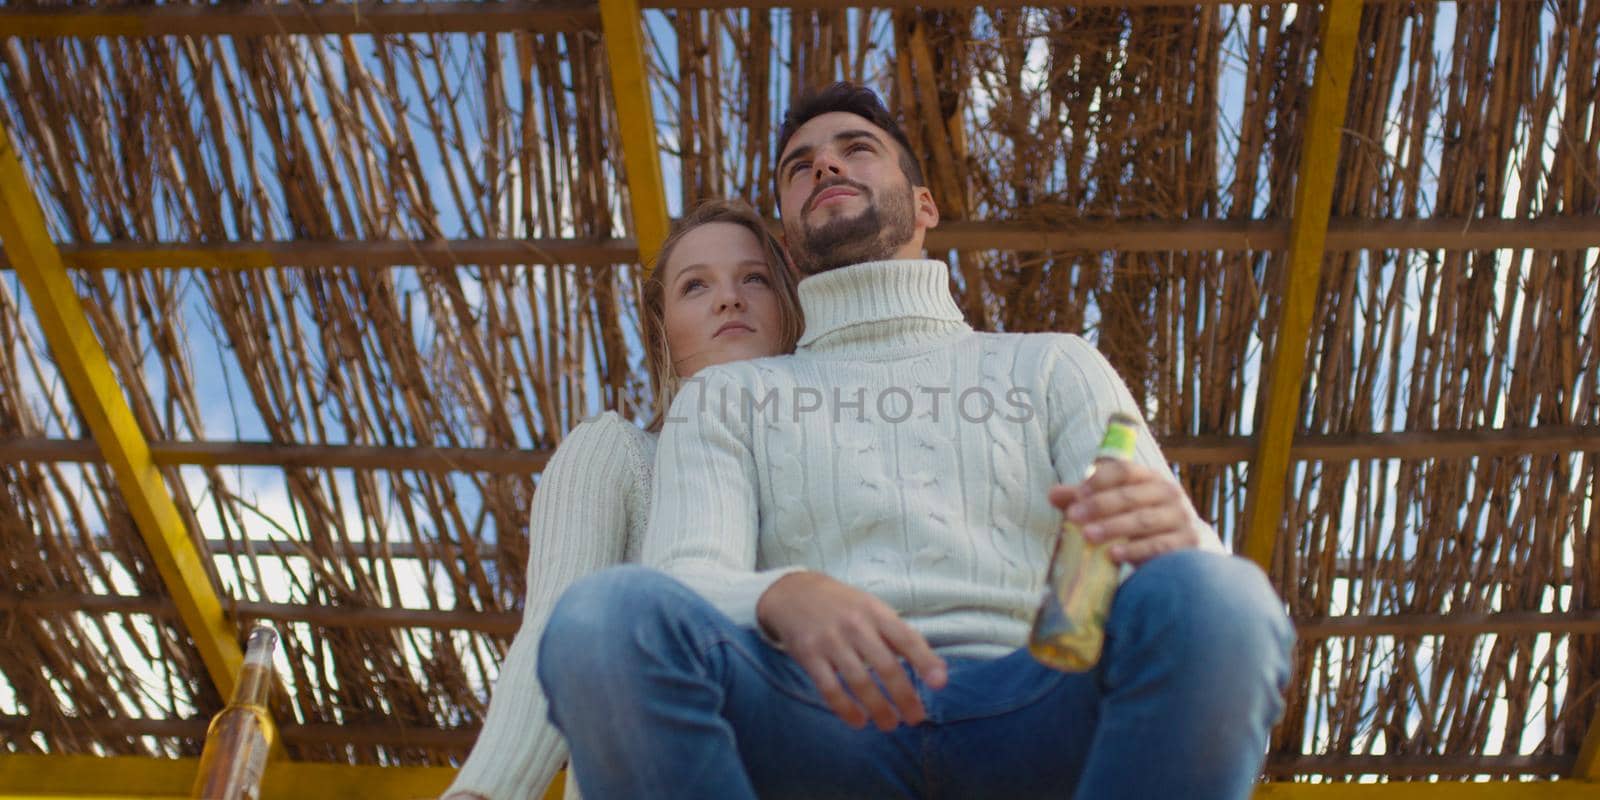 Couple Drinking Beer Together on beach during autumn time